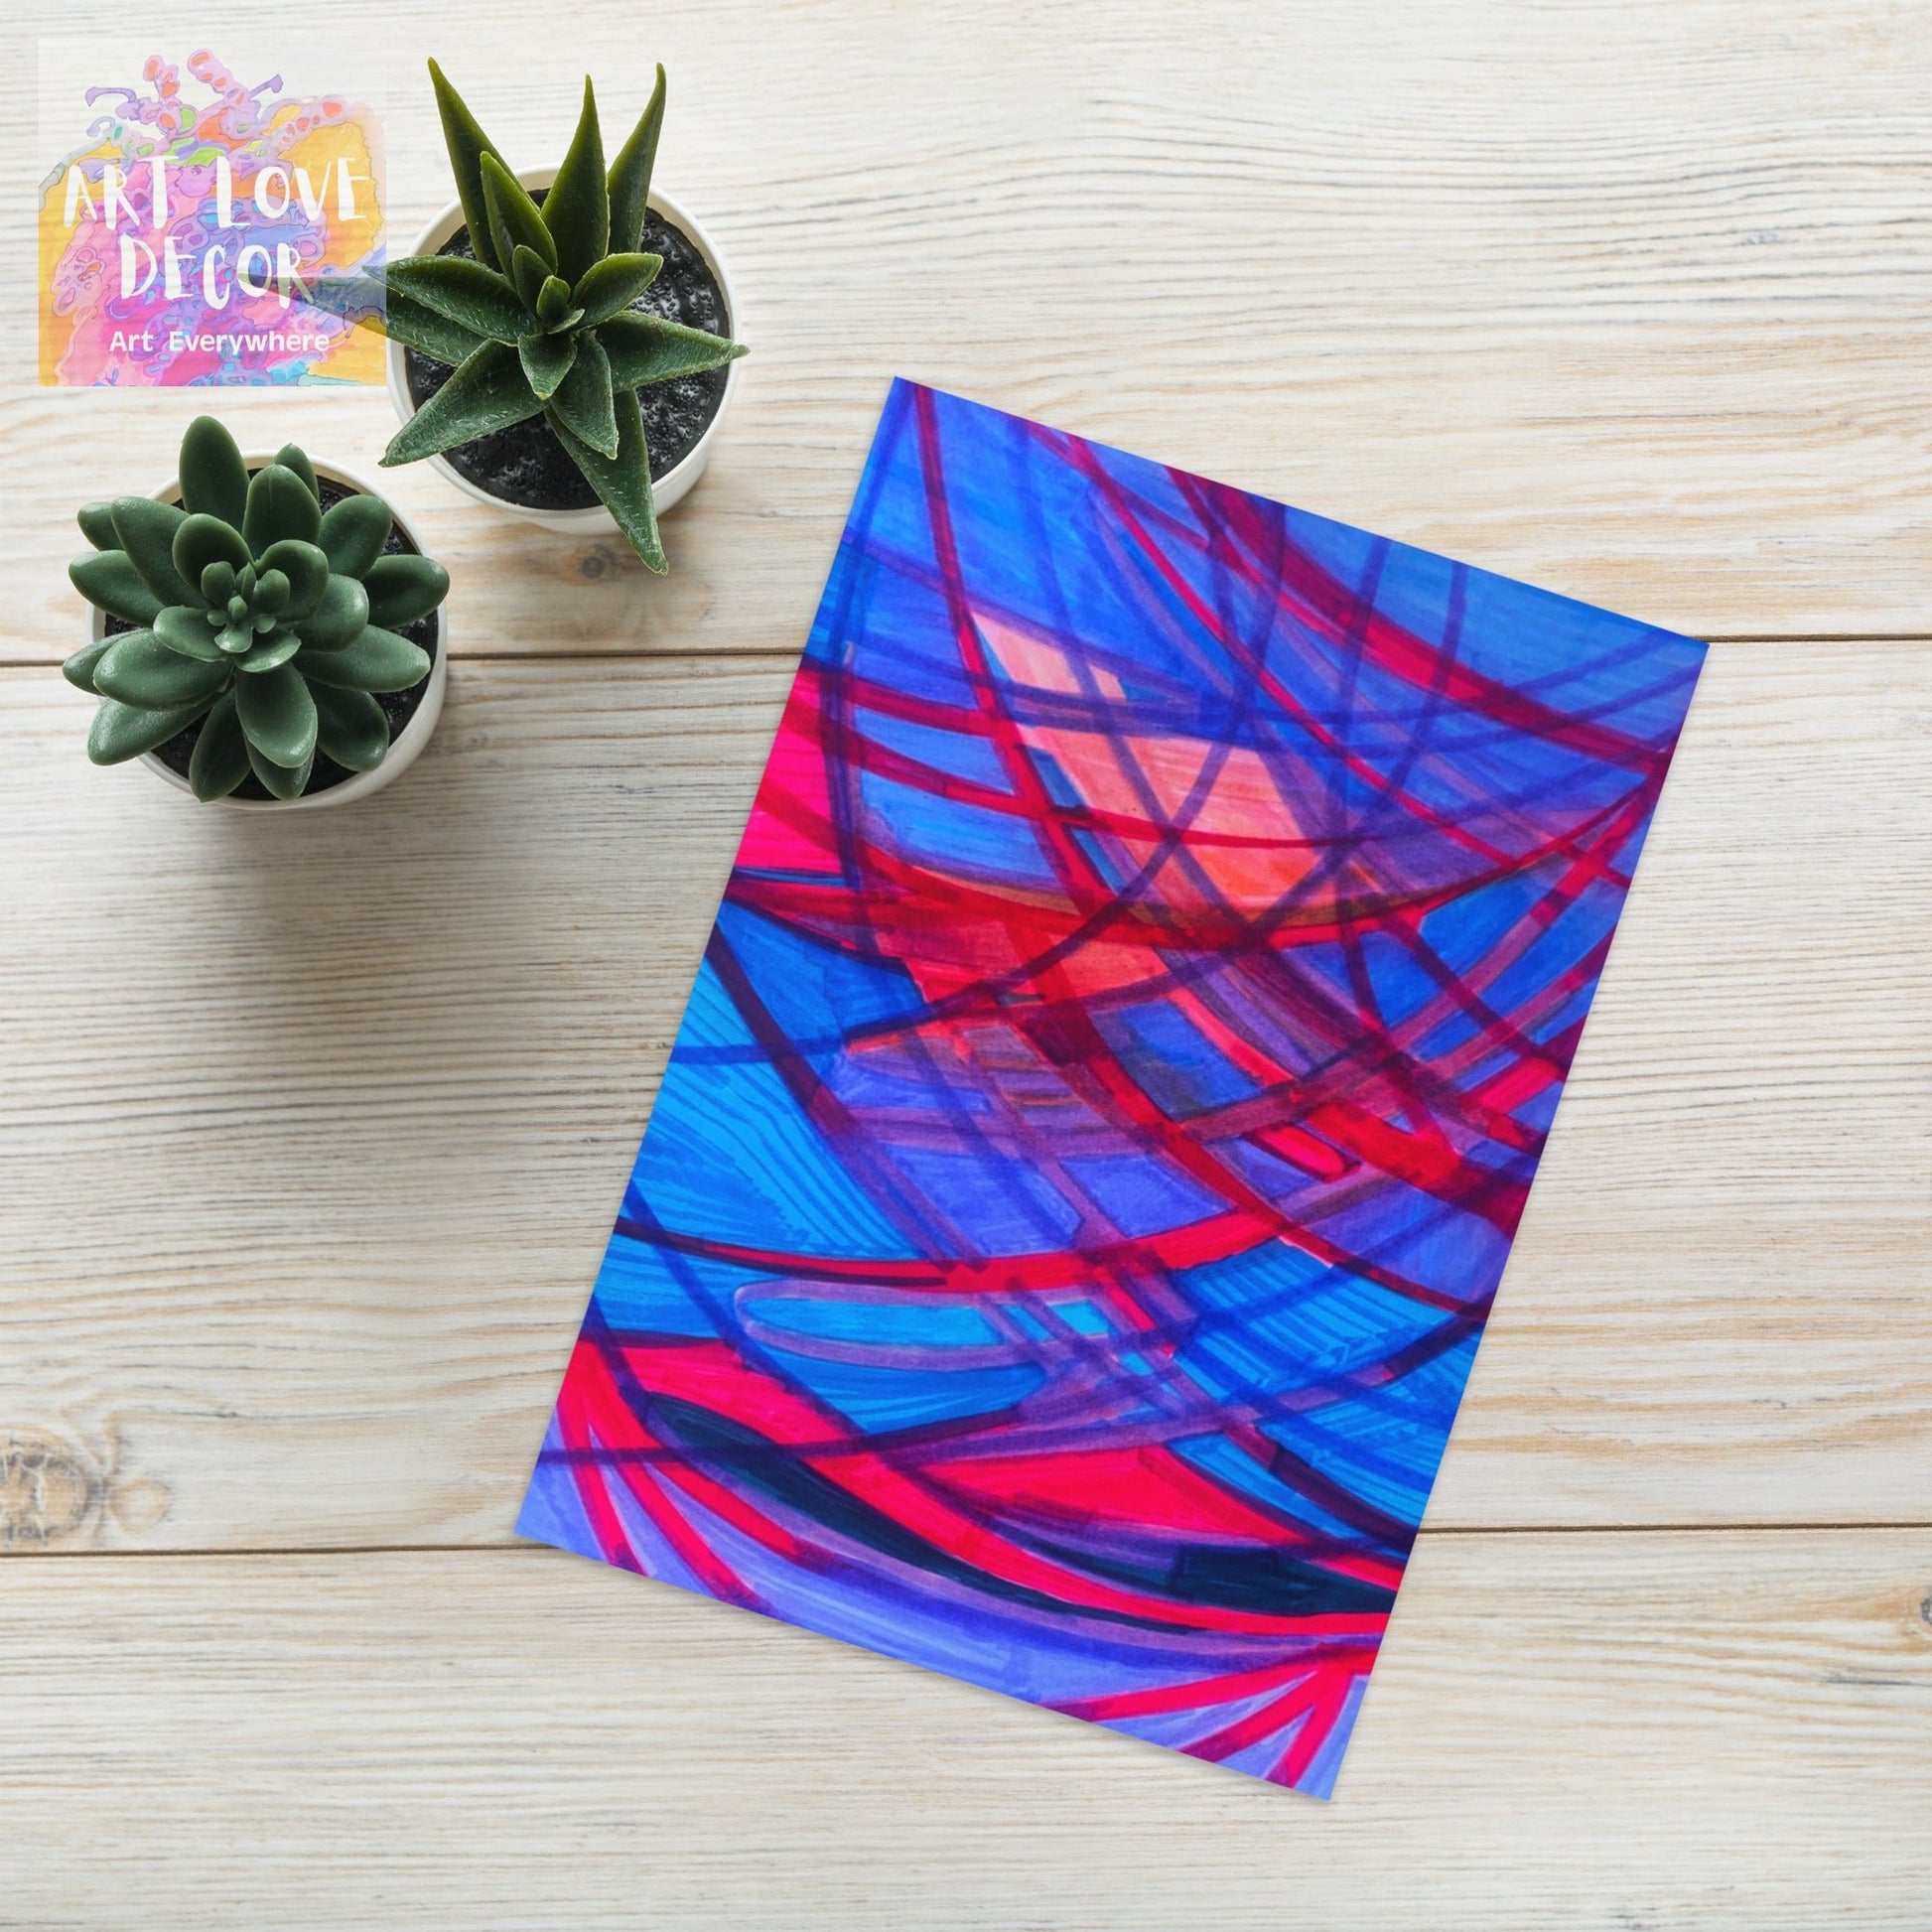 Hanging Around Abstract Greeting card - Art Love Decor